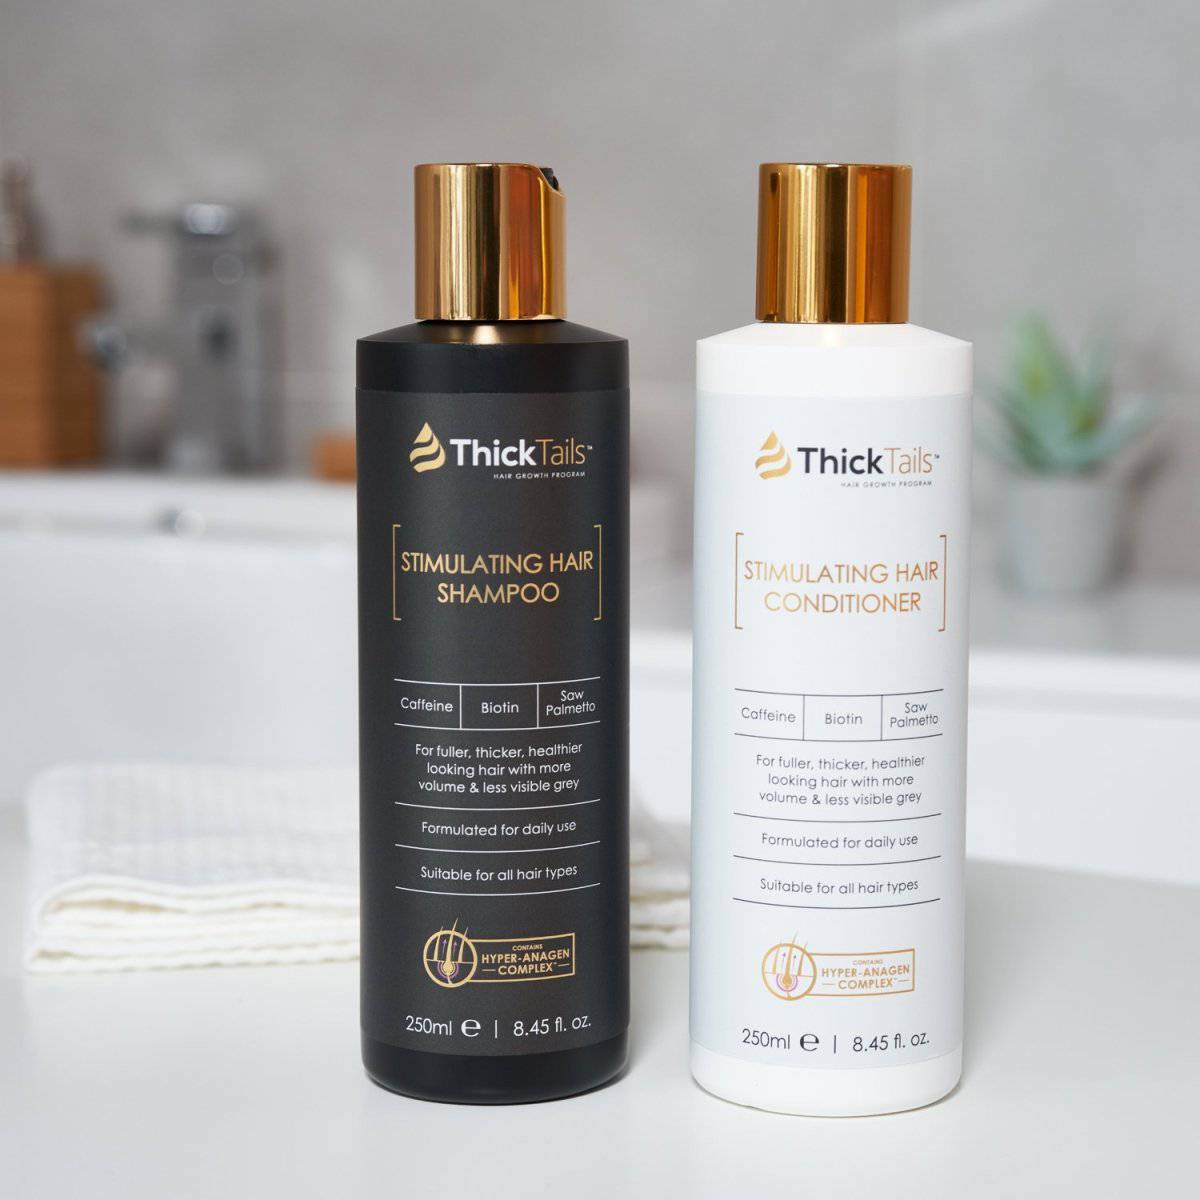 ThickTails Stimulating Hair Growth Shampoo & Conditioner | Dual Pack